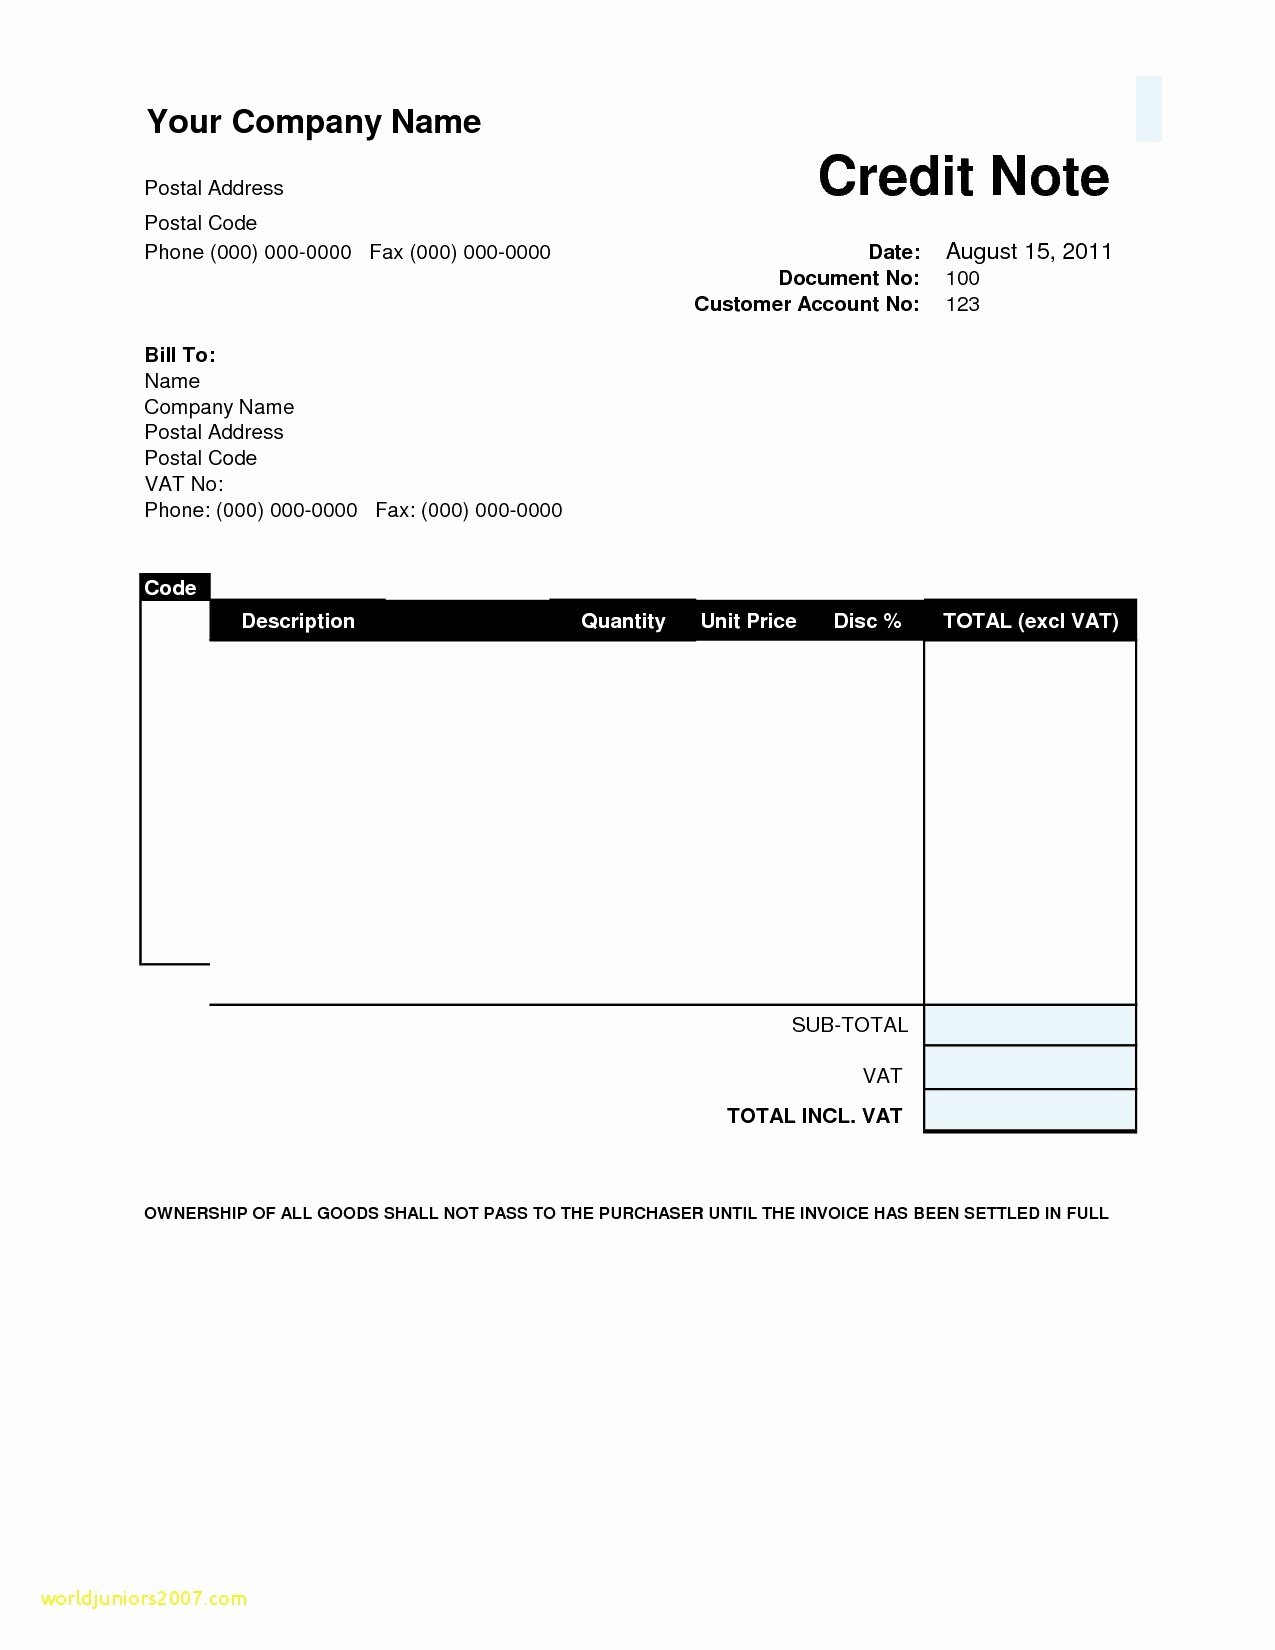 Receipt Of Payment Letter Beautiful Receipt Letter Template Samples